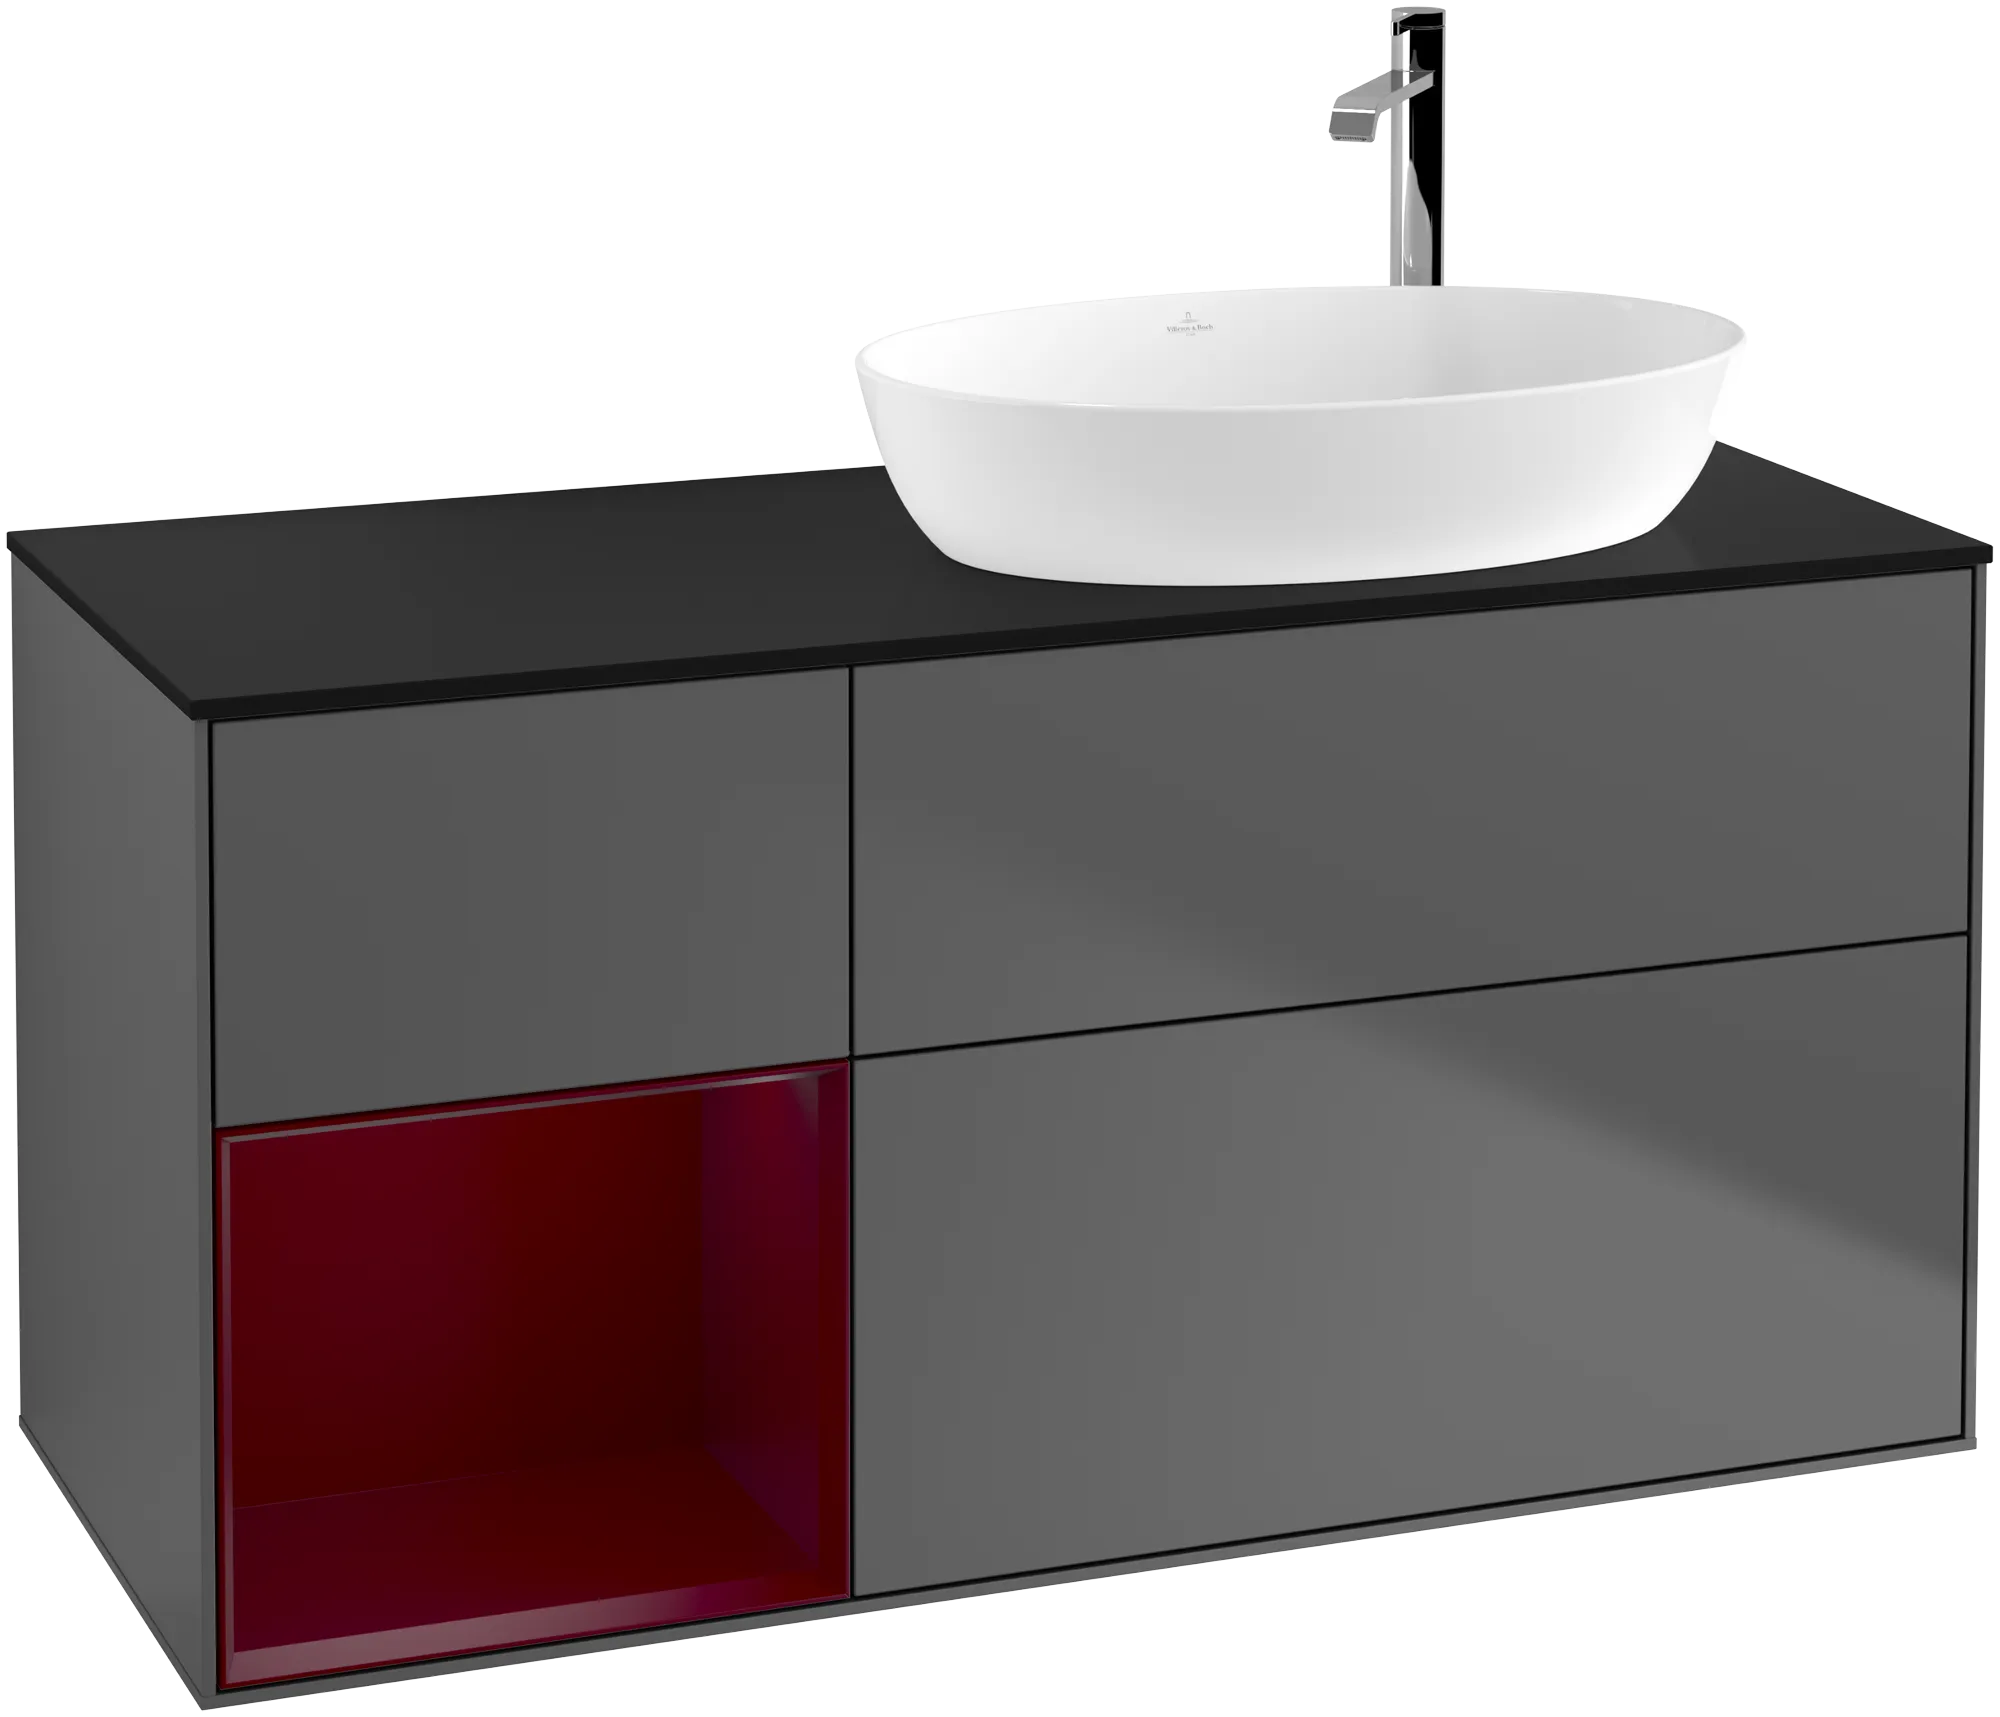 Picture of VILLEROY BOCH Finion Vanity unit, with lighting, 3 pull-out compartments, 1200 x 603 x 501 mm, Anthracite Matt Lacquer / Peony Matt Lacquer / Glass Black Matt #G922HBGK